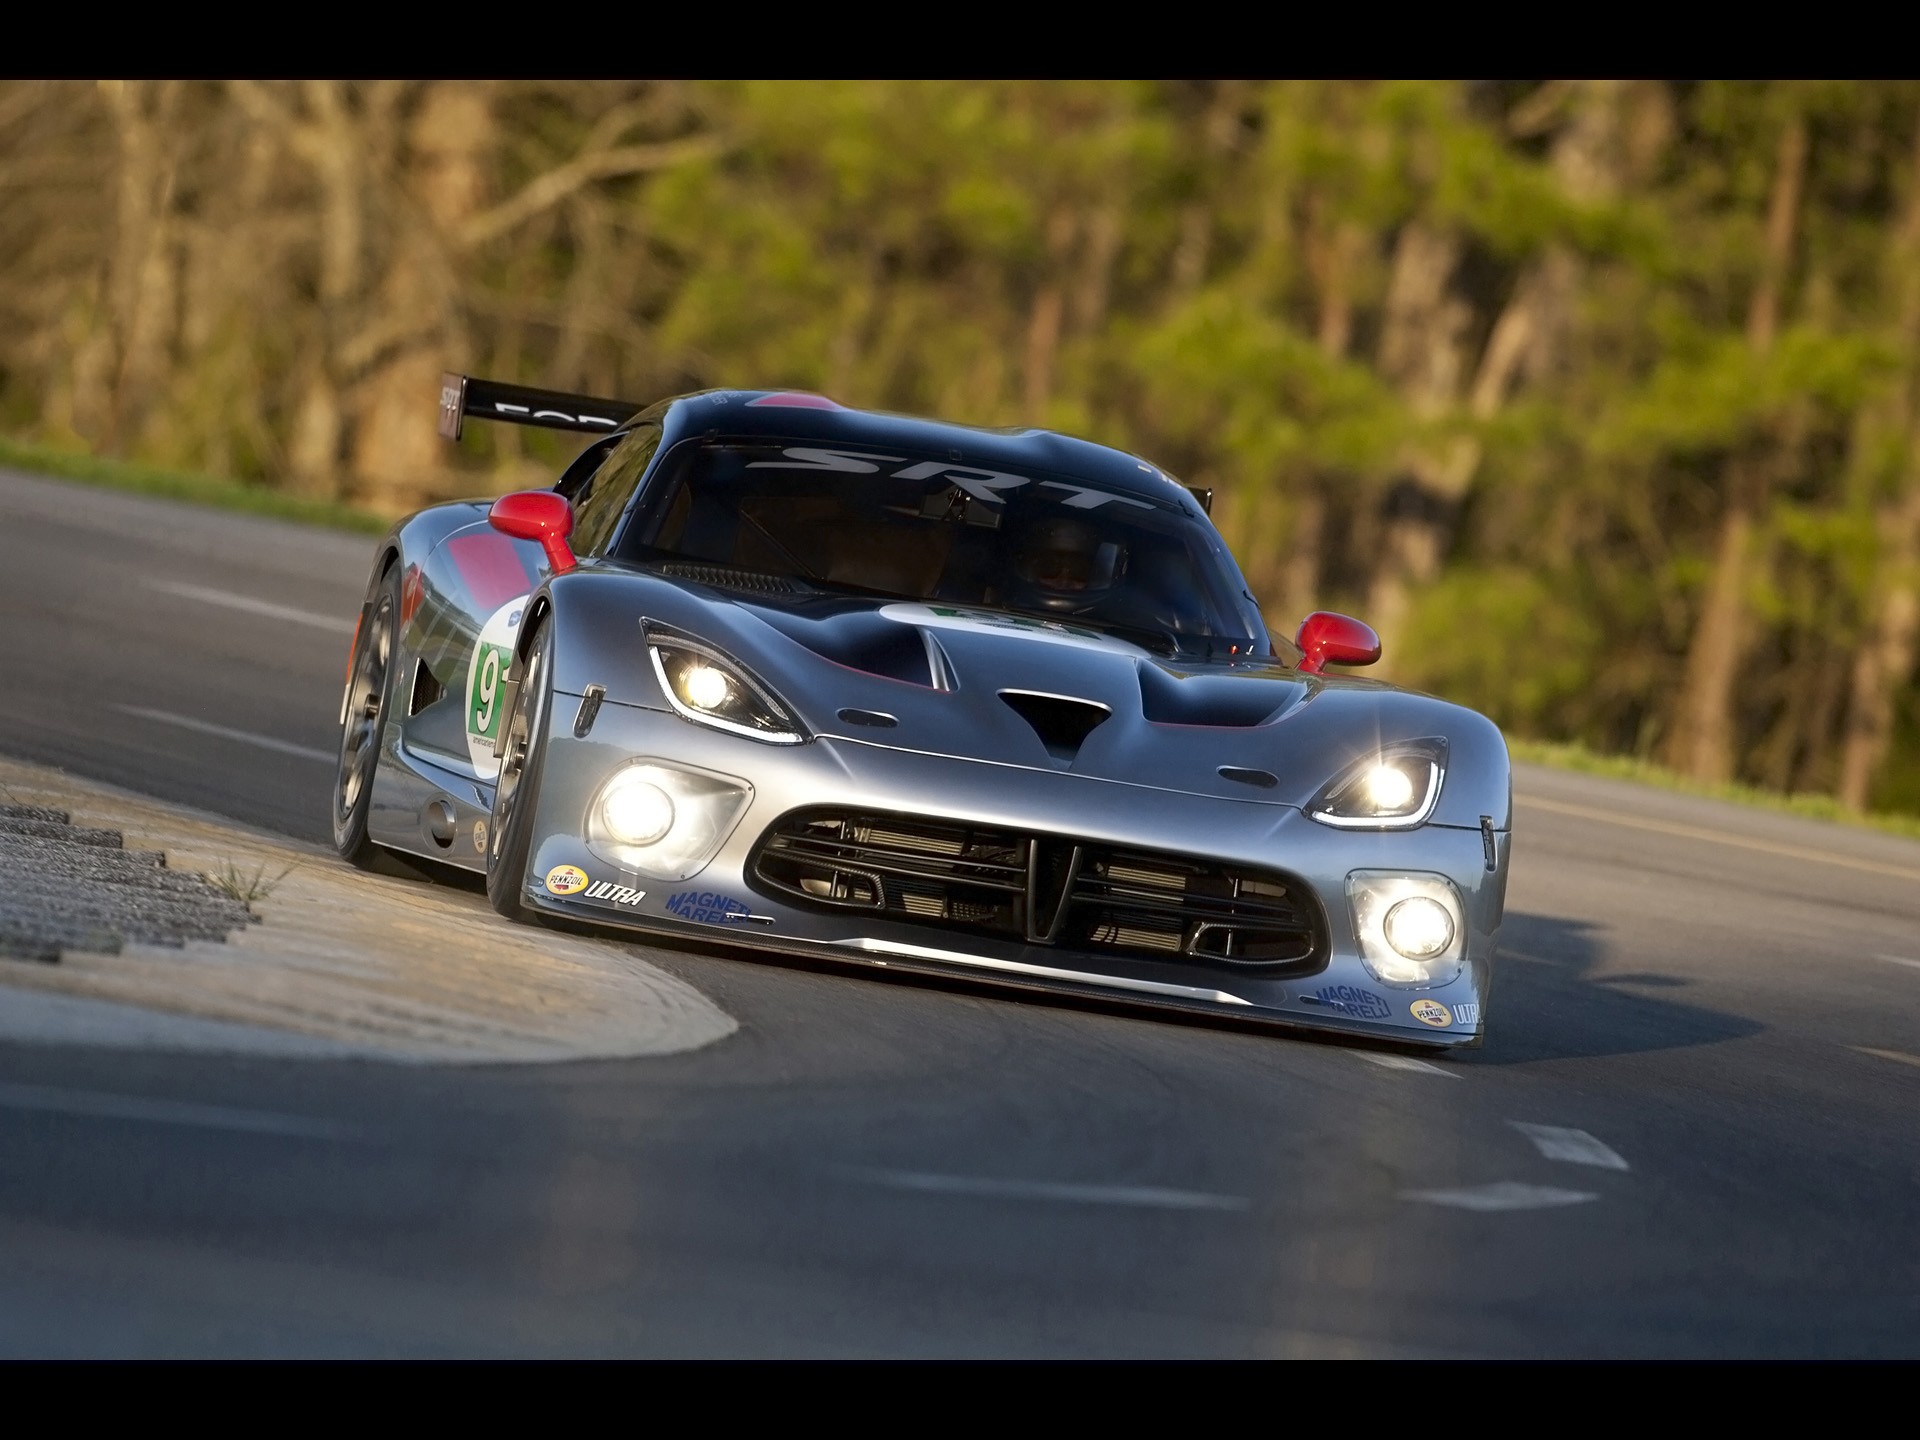 cars, Front, Viper, Dodge, Vehicles, Supercars, Gts, Speed Wallpaper